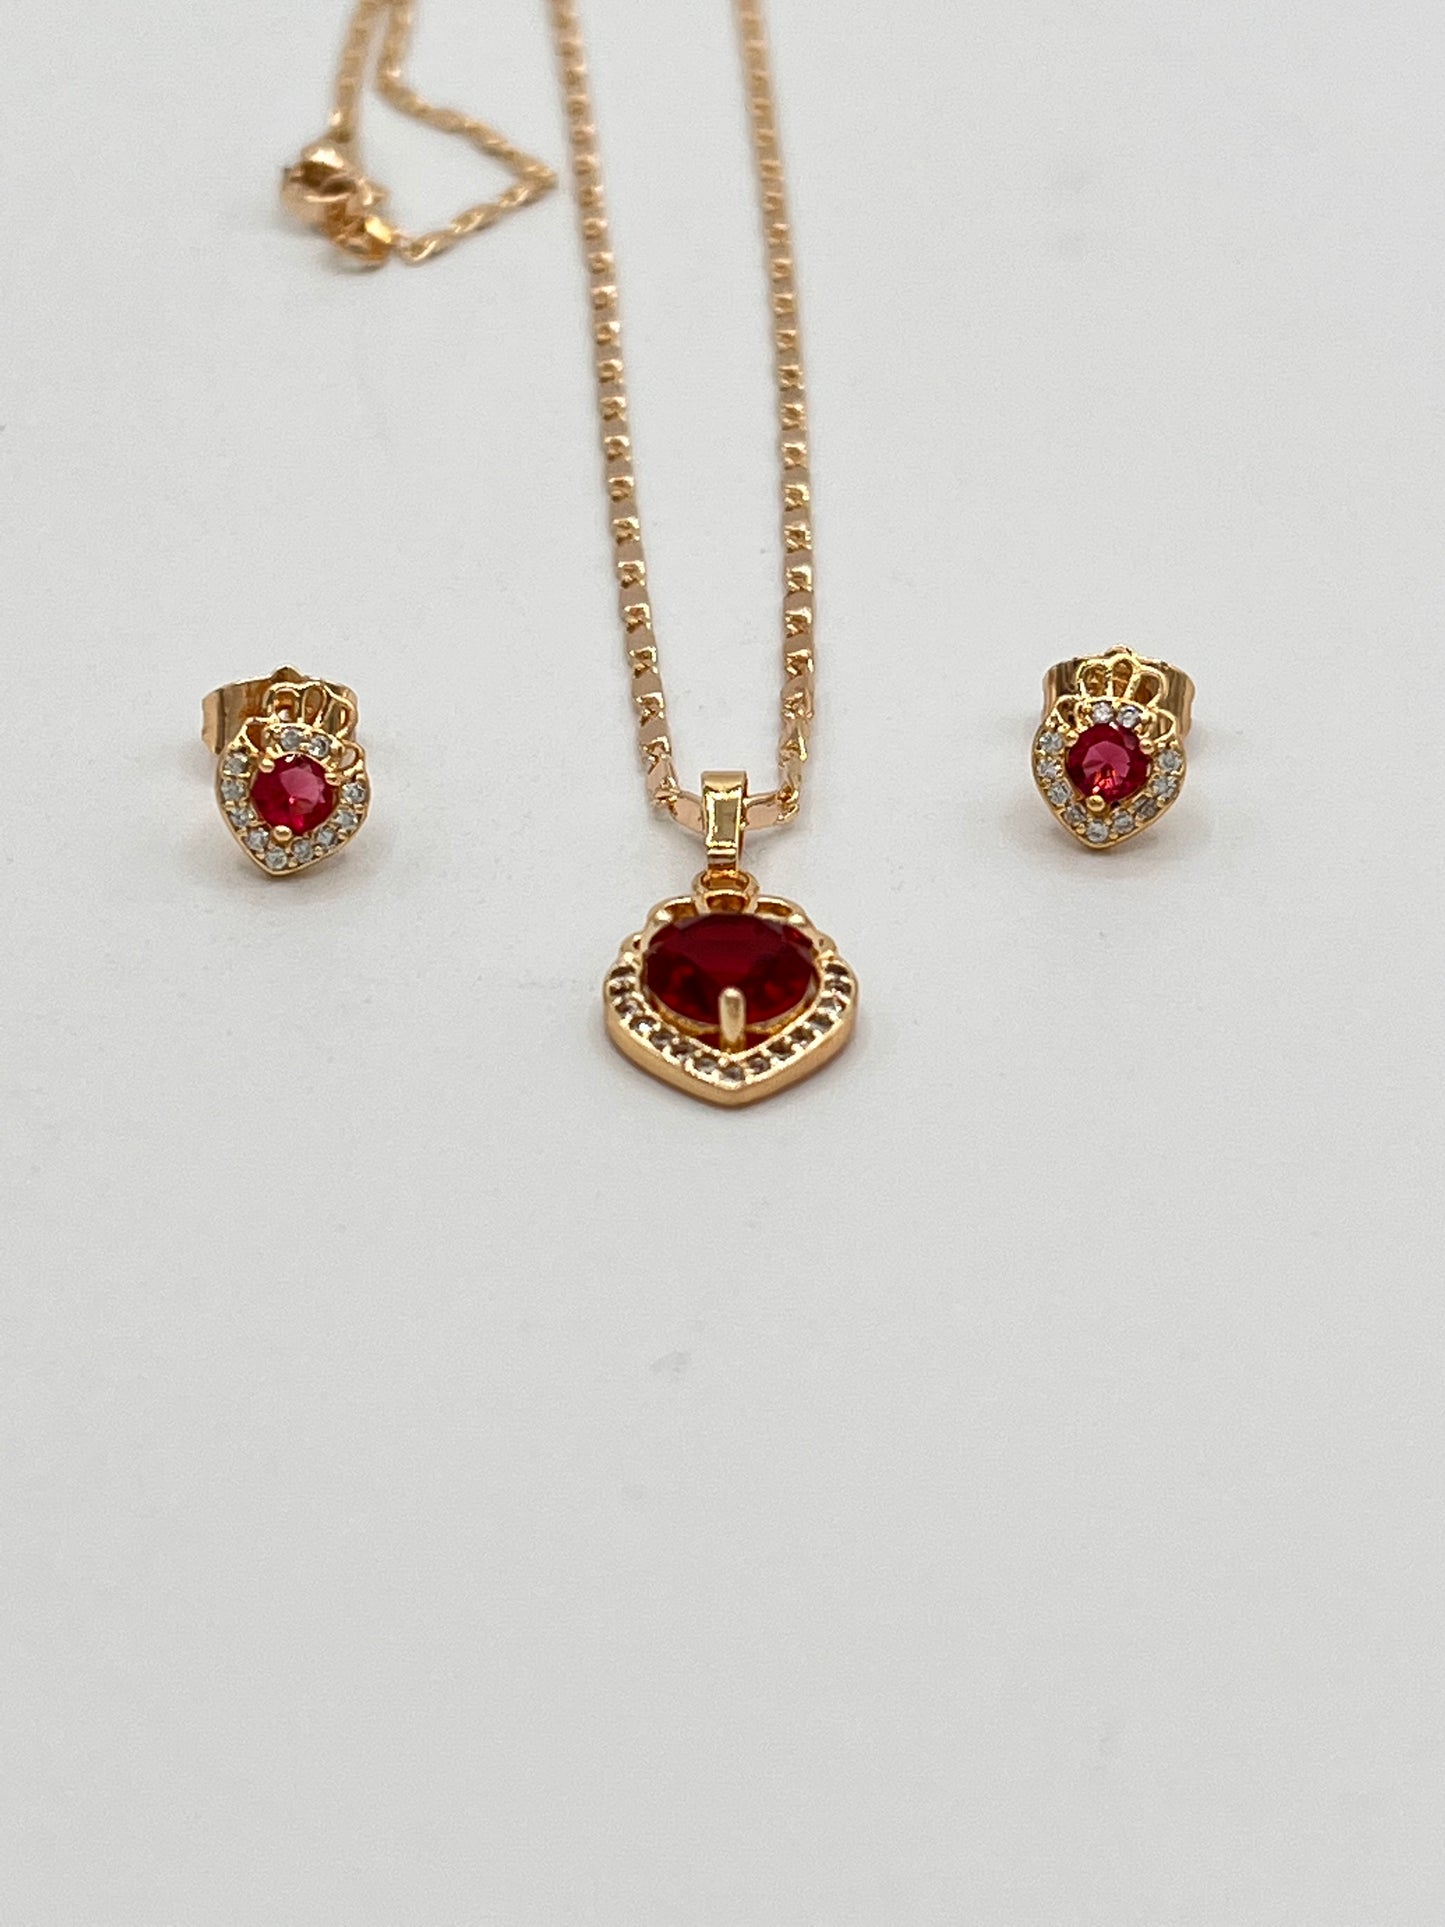 Queen Earrings and Necklace Set Gold Plated